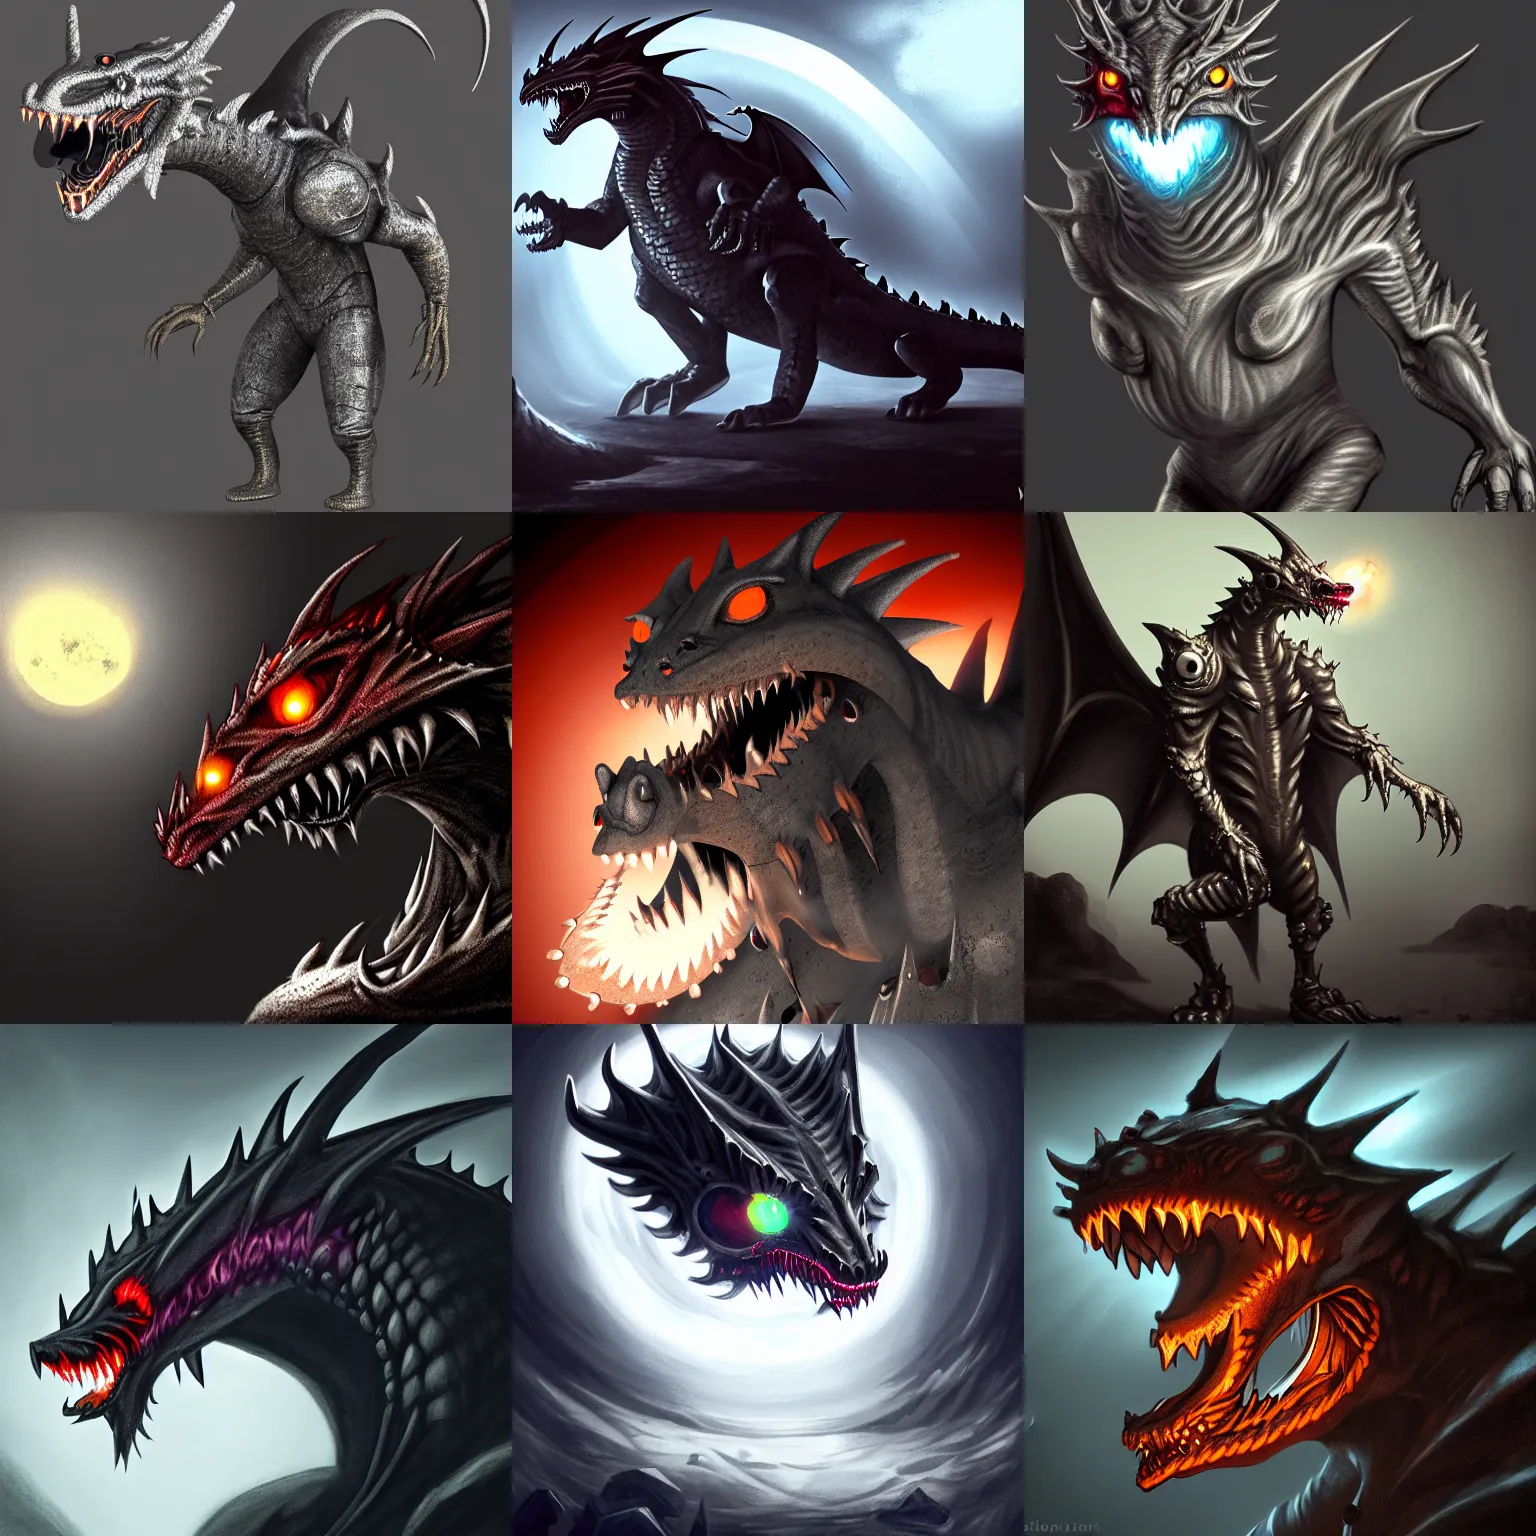 Prompt: snarling anthropomorphic dragon with glowing eyes and mouth standing in a crater, glowing eyes, glowing mouth, charcoal and silver color scheme, rubber suit, full body single character, moonlit night, good value control, high contrast, biomechanical elements, sci-fi, concept art